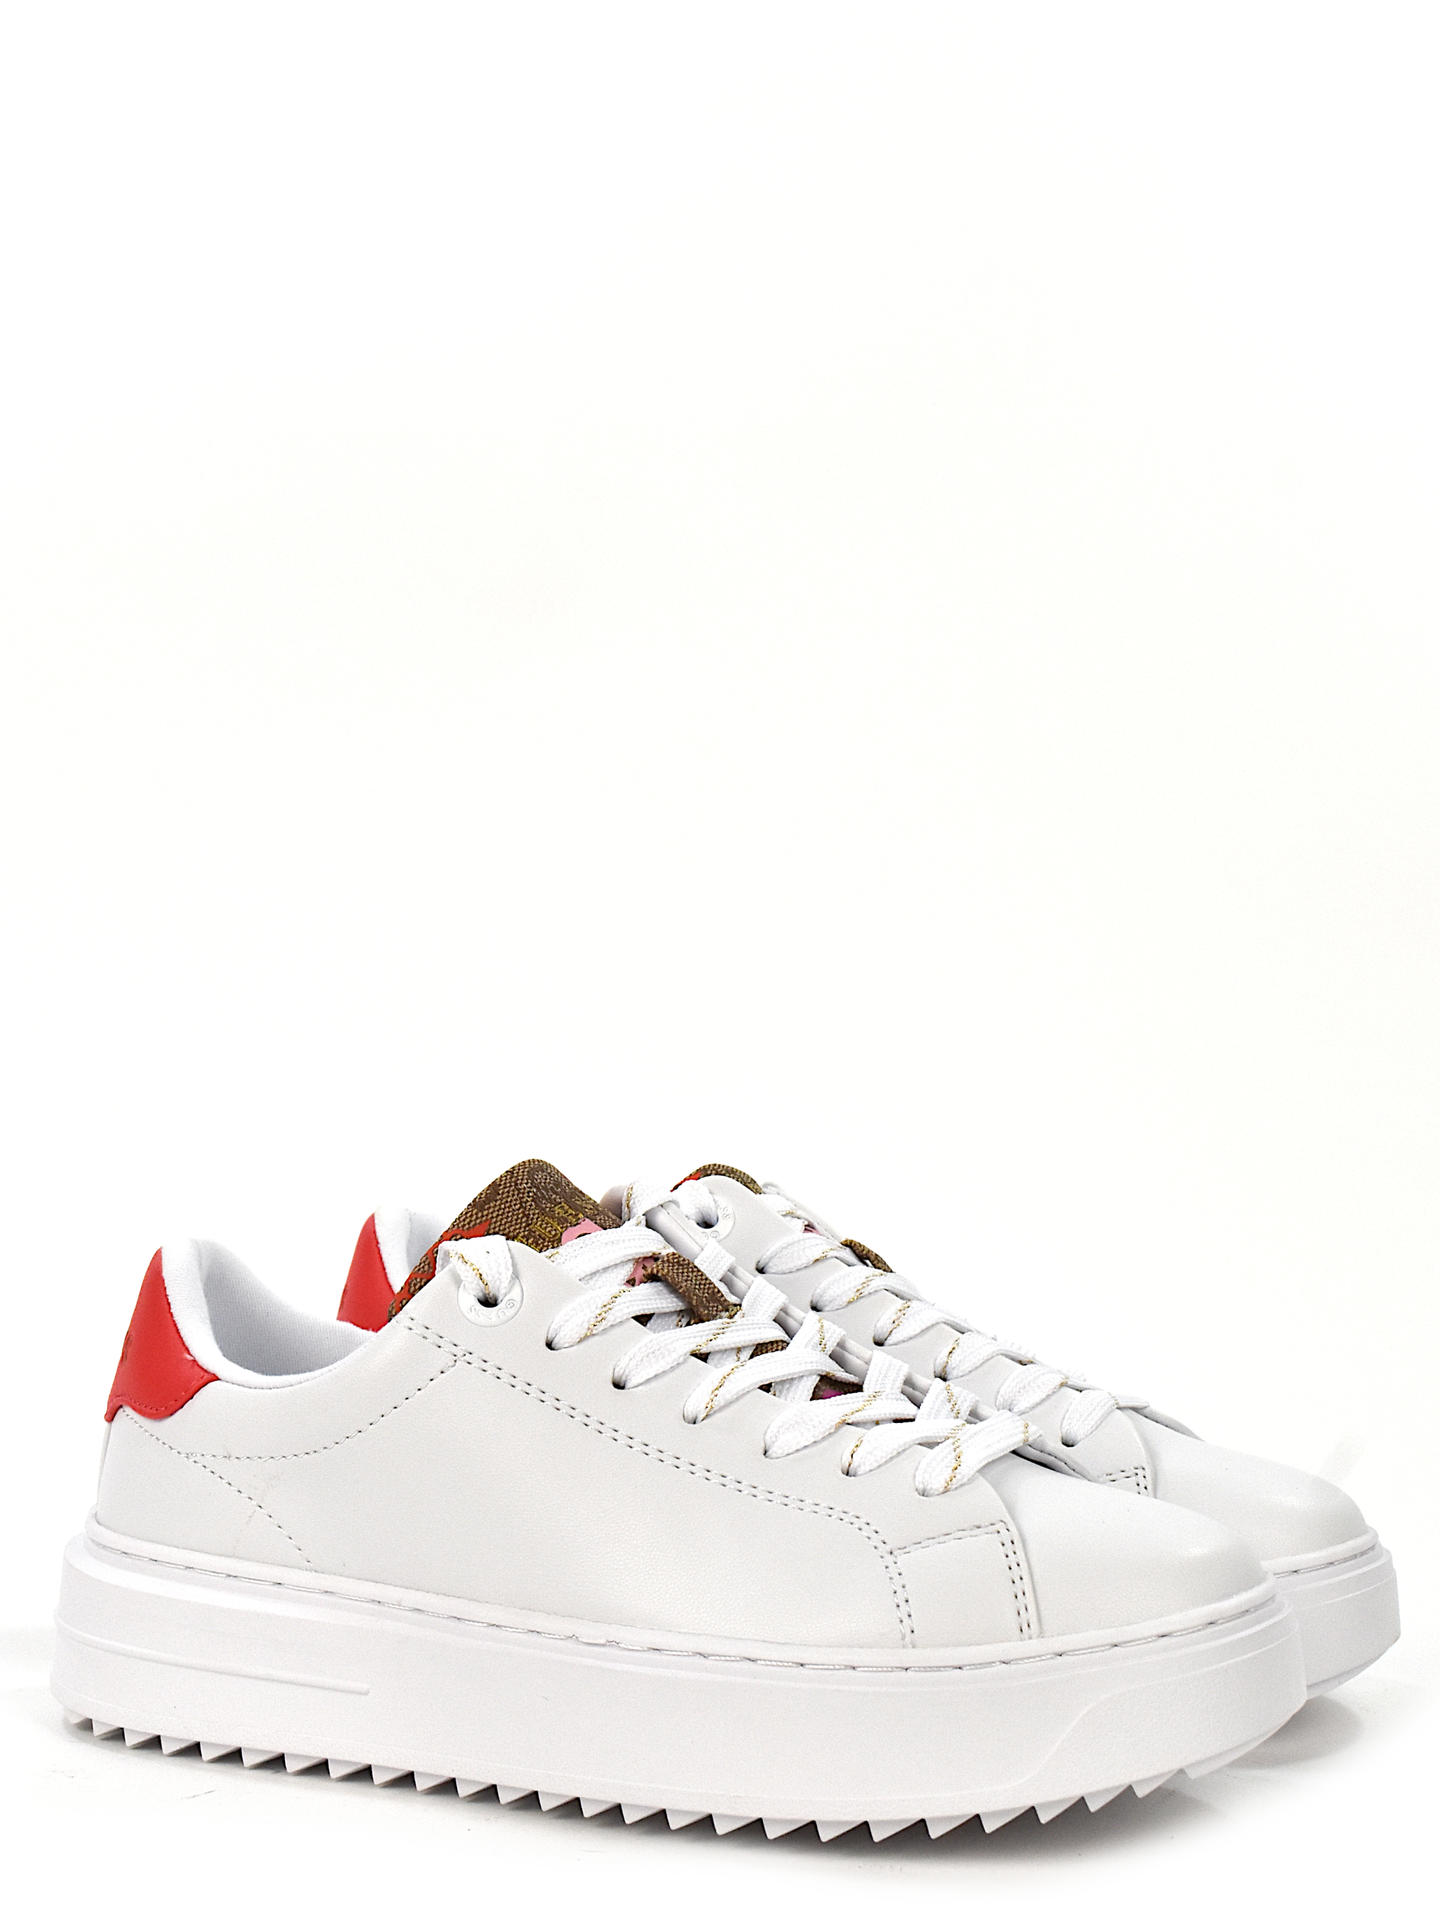 SNEAKERS GUESS DENESA4 BIANCO/ROSSO